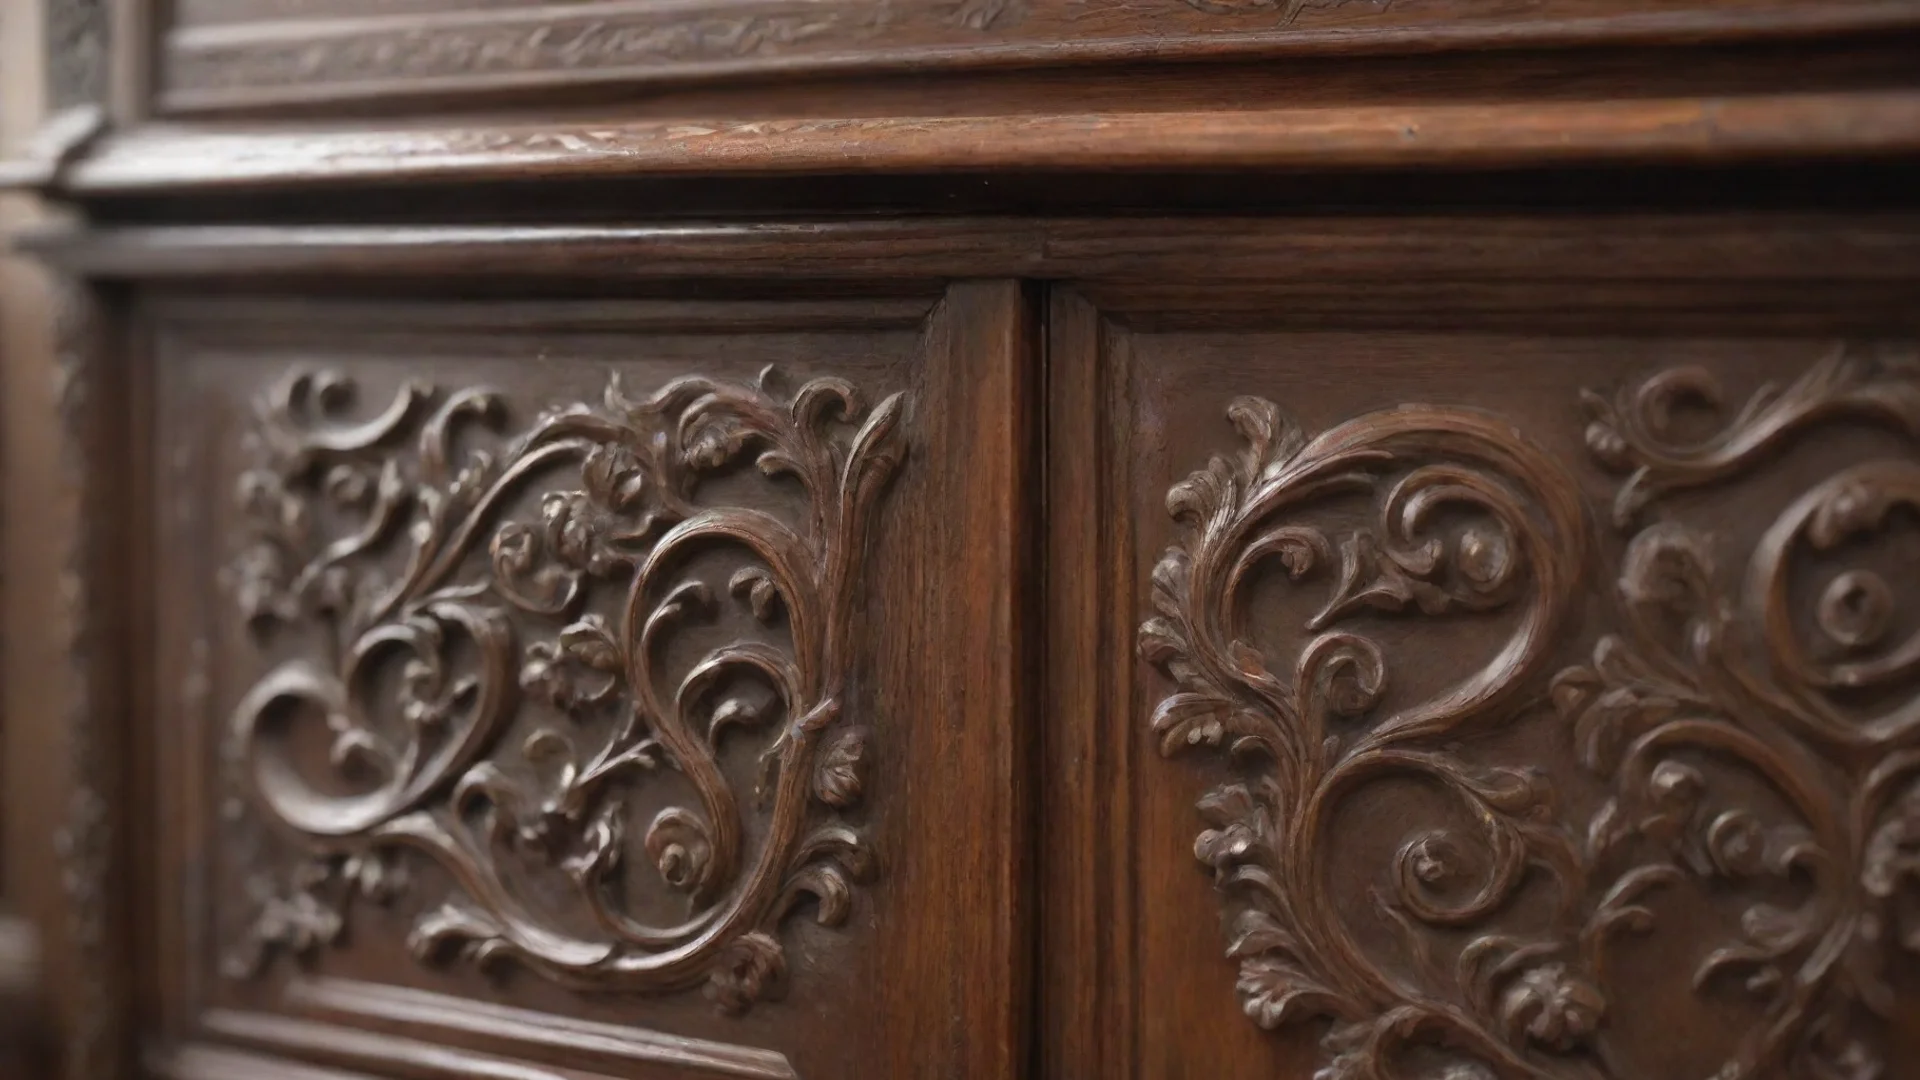 aitrending detail view of an ornate wooden cabinet dark brown at the edge blurred with high craftsmanship good looking fantastic 1 hdwidescreen